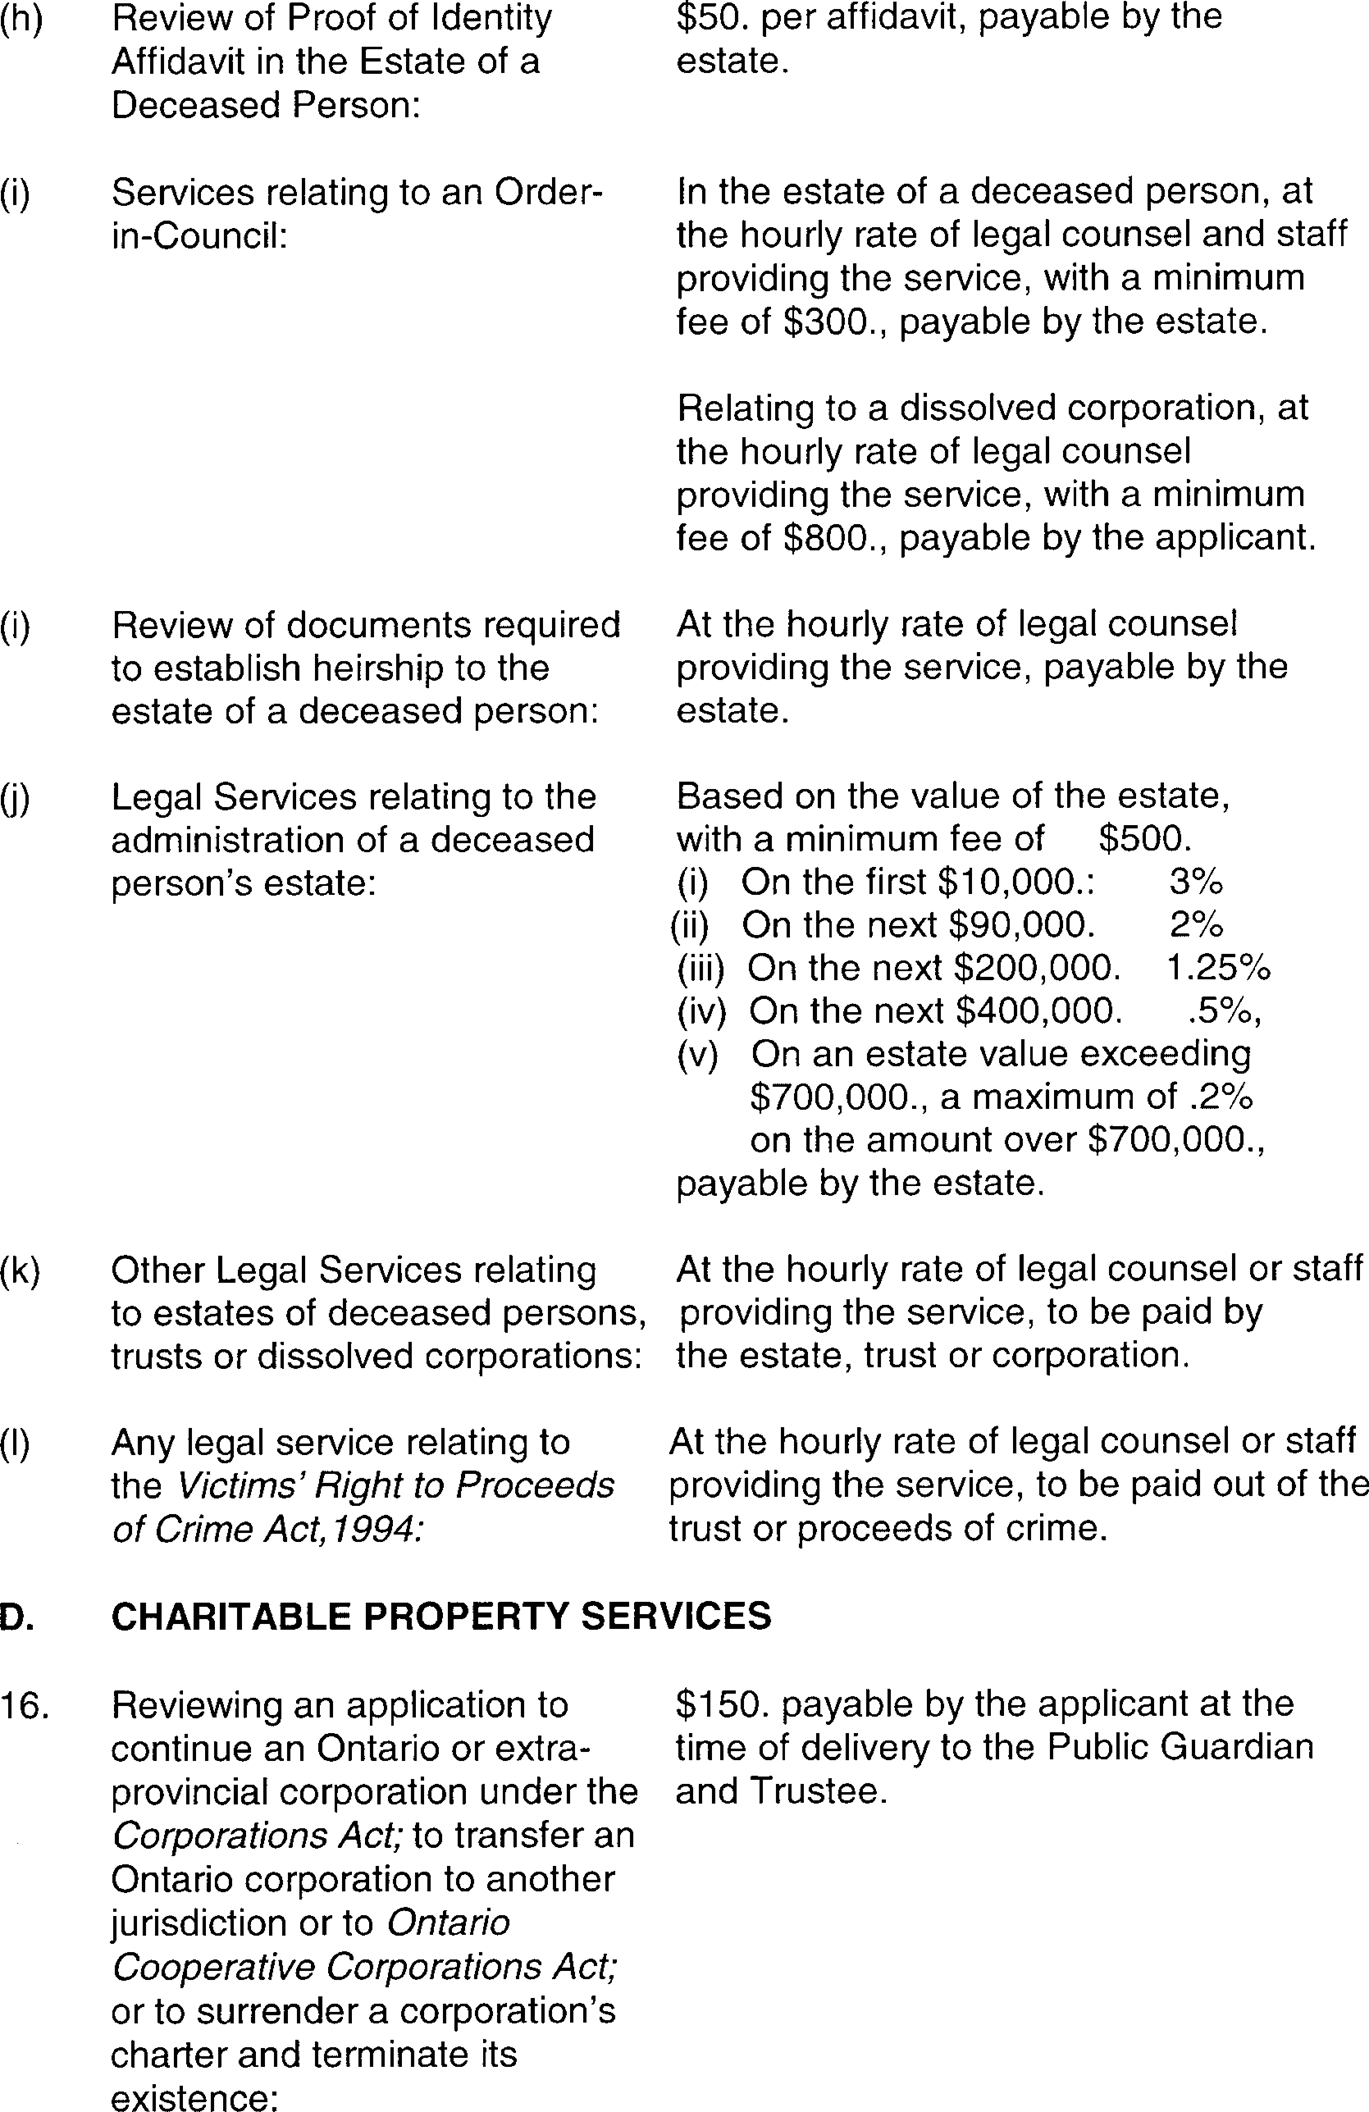 Photocopy of Fees of the Public Guardian and Trustee (pursuant to s. 8(2) of the Public Guardian and Trustee Act, R.S.O 1990, c. P.51, as amended)